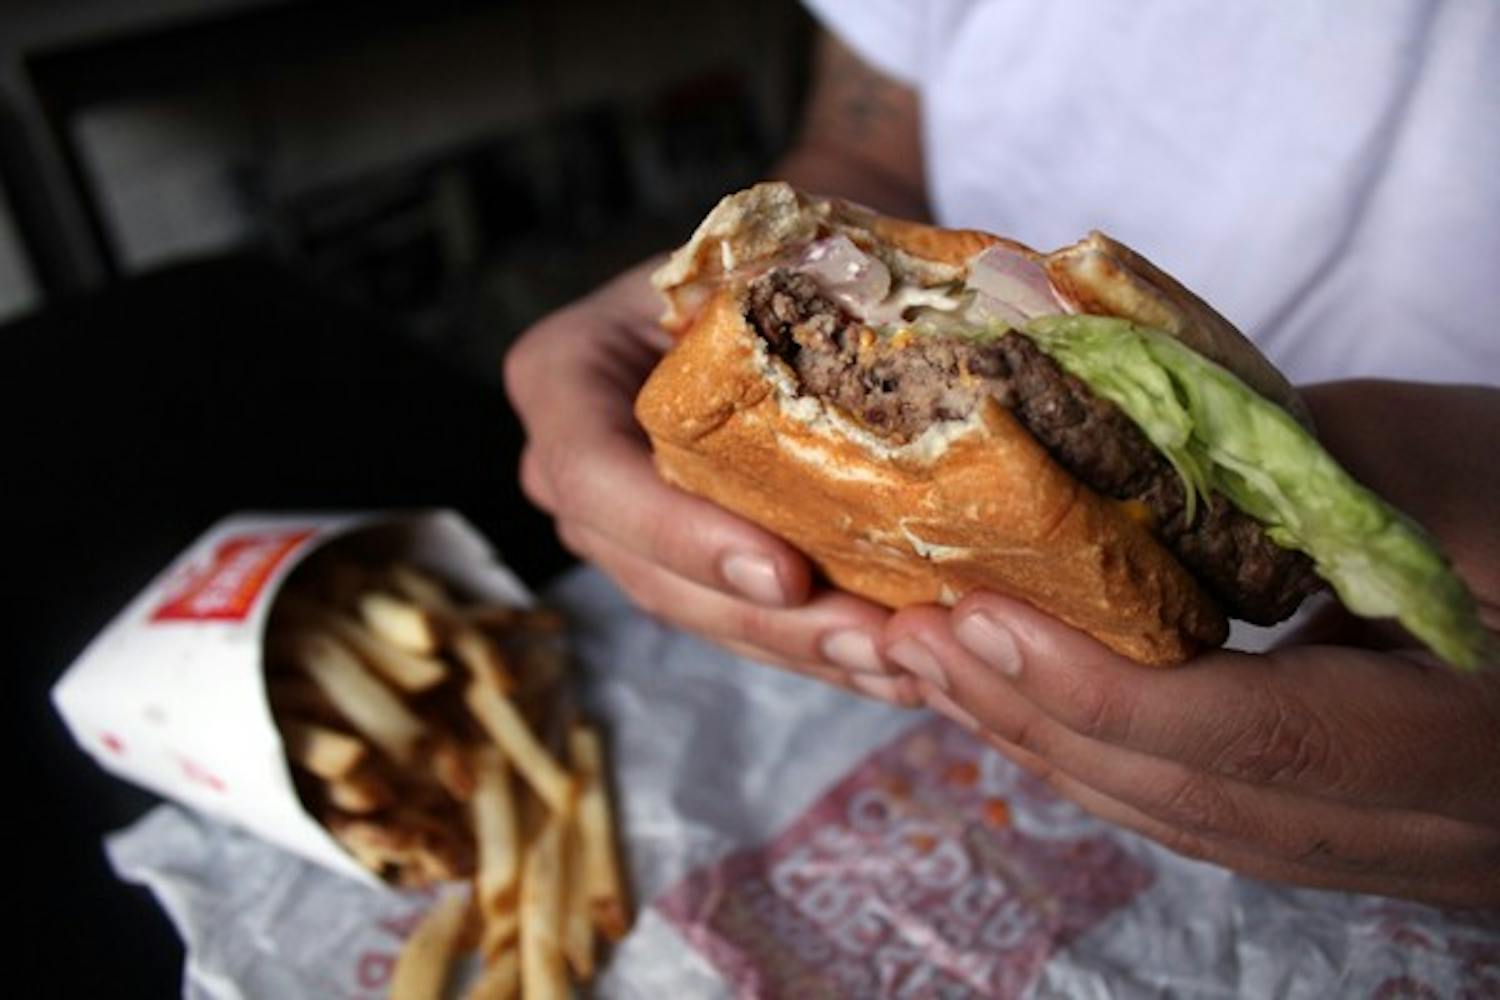 Fast food is an easy fallback for college students on the go and on a tight budget. According to an ASU nutrition expert, though, fast food intake should be limited. (Photo by Jenn Allen)